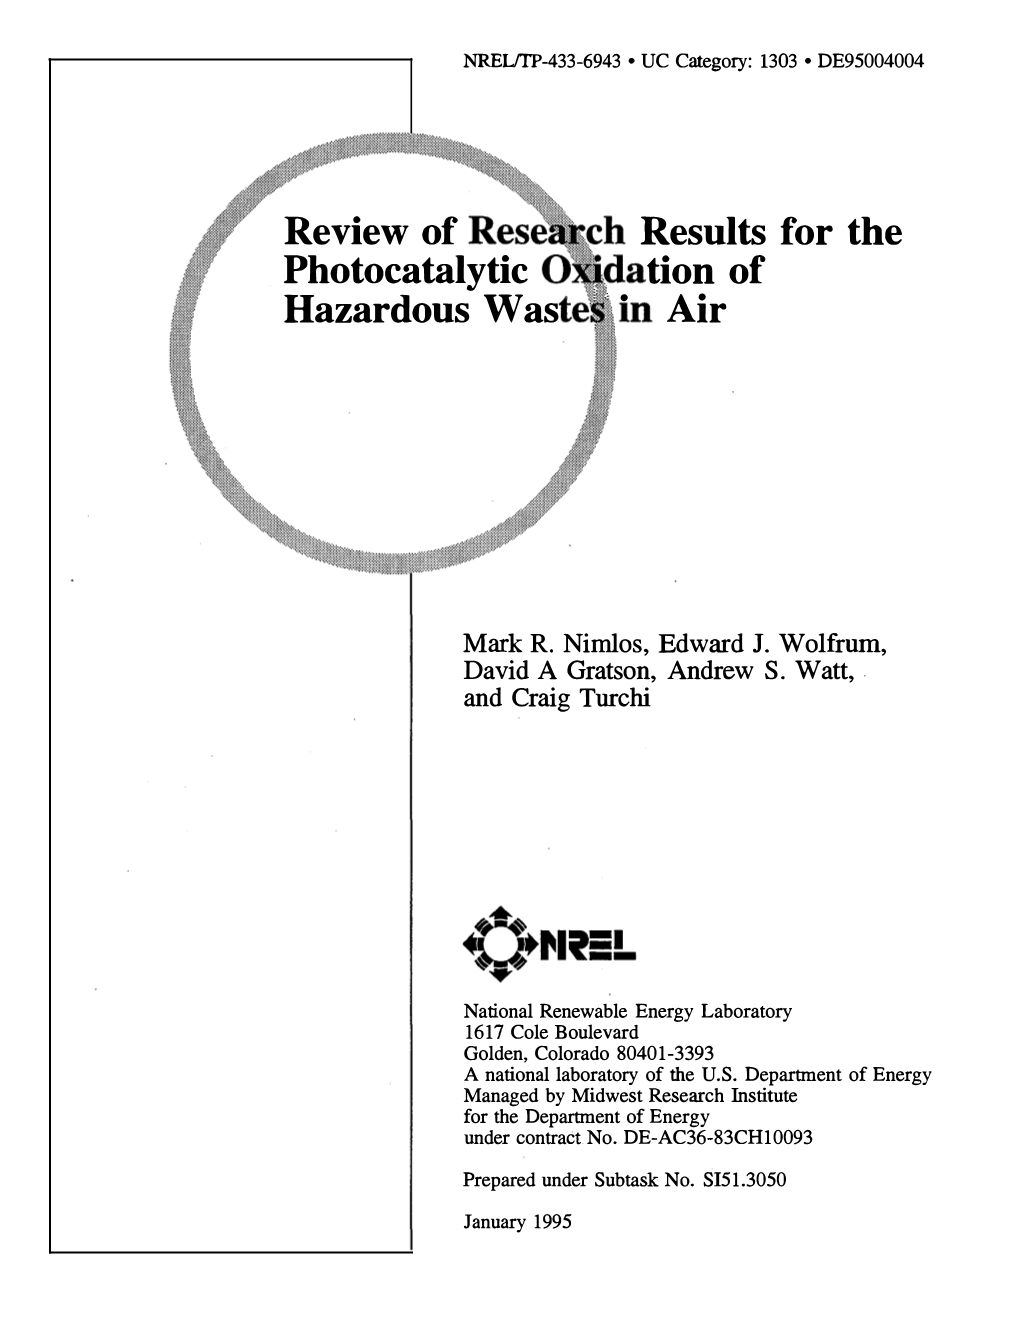 Review of Research Results for the Photocatalytic Oxidation of Hazardous Wastes in Air (C) (TA) Sl5 1 .3050 6